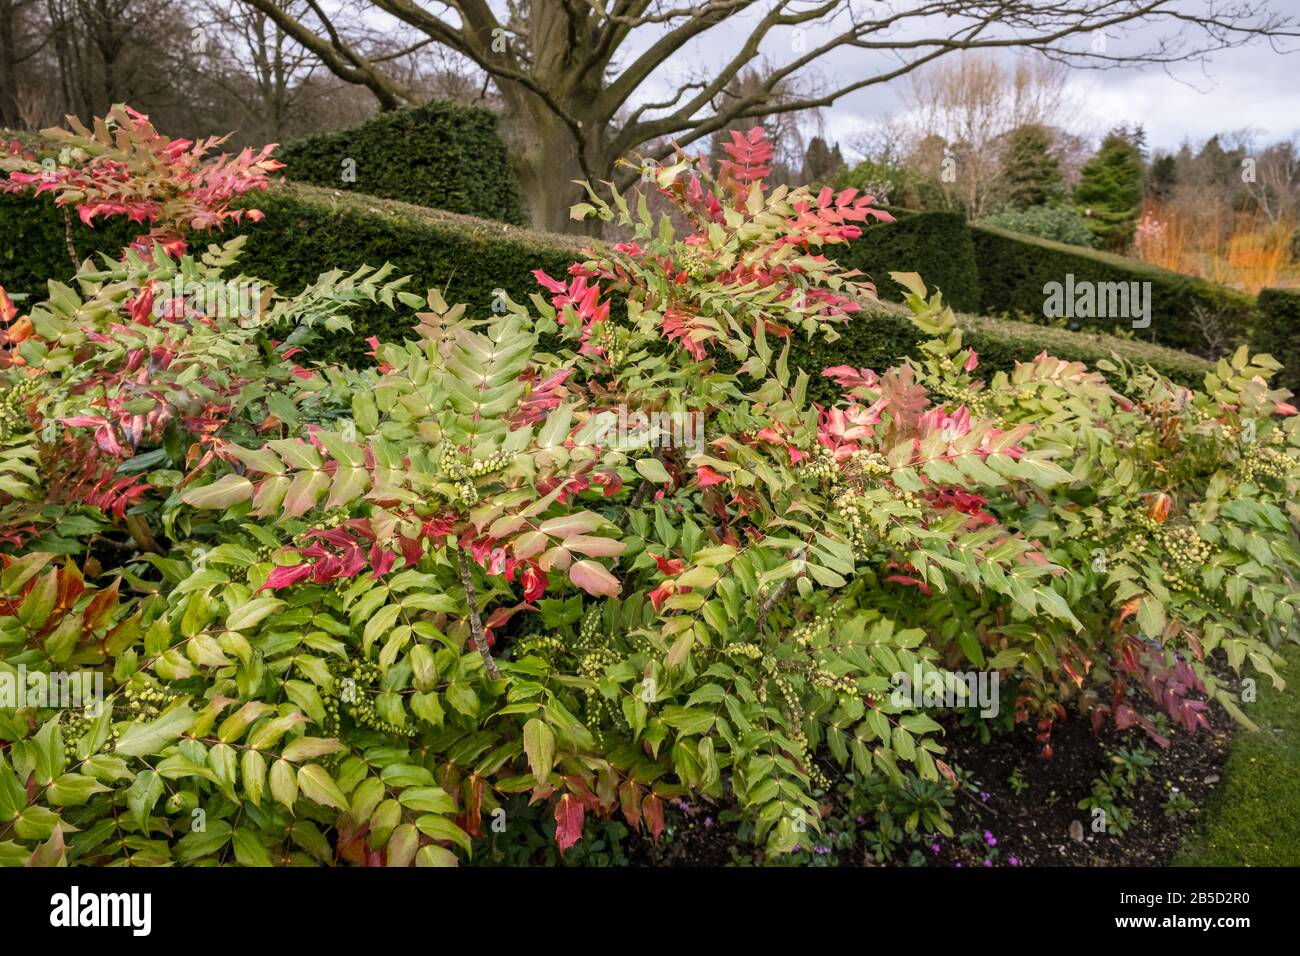 Mahonia Bealei evergreen shrub with red tinged leaves providing colour and texture in a late winter / early spring garden, March, England, UK Stock Photo